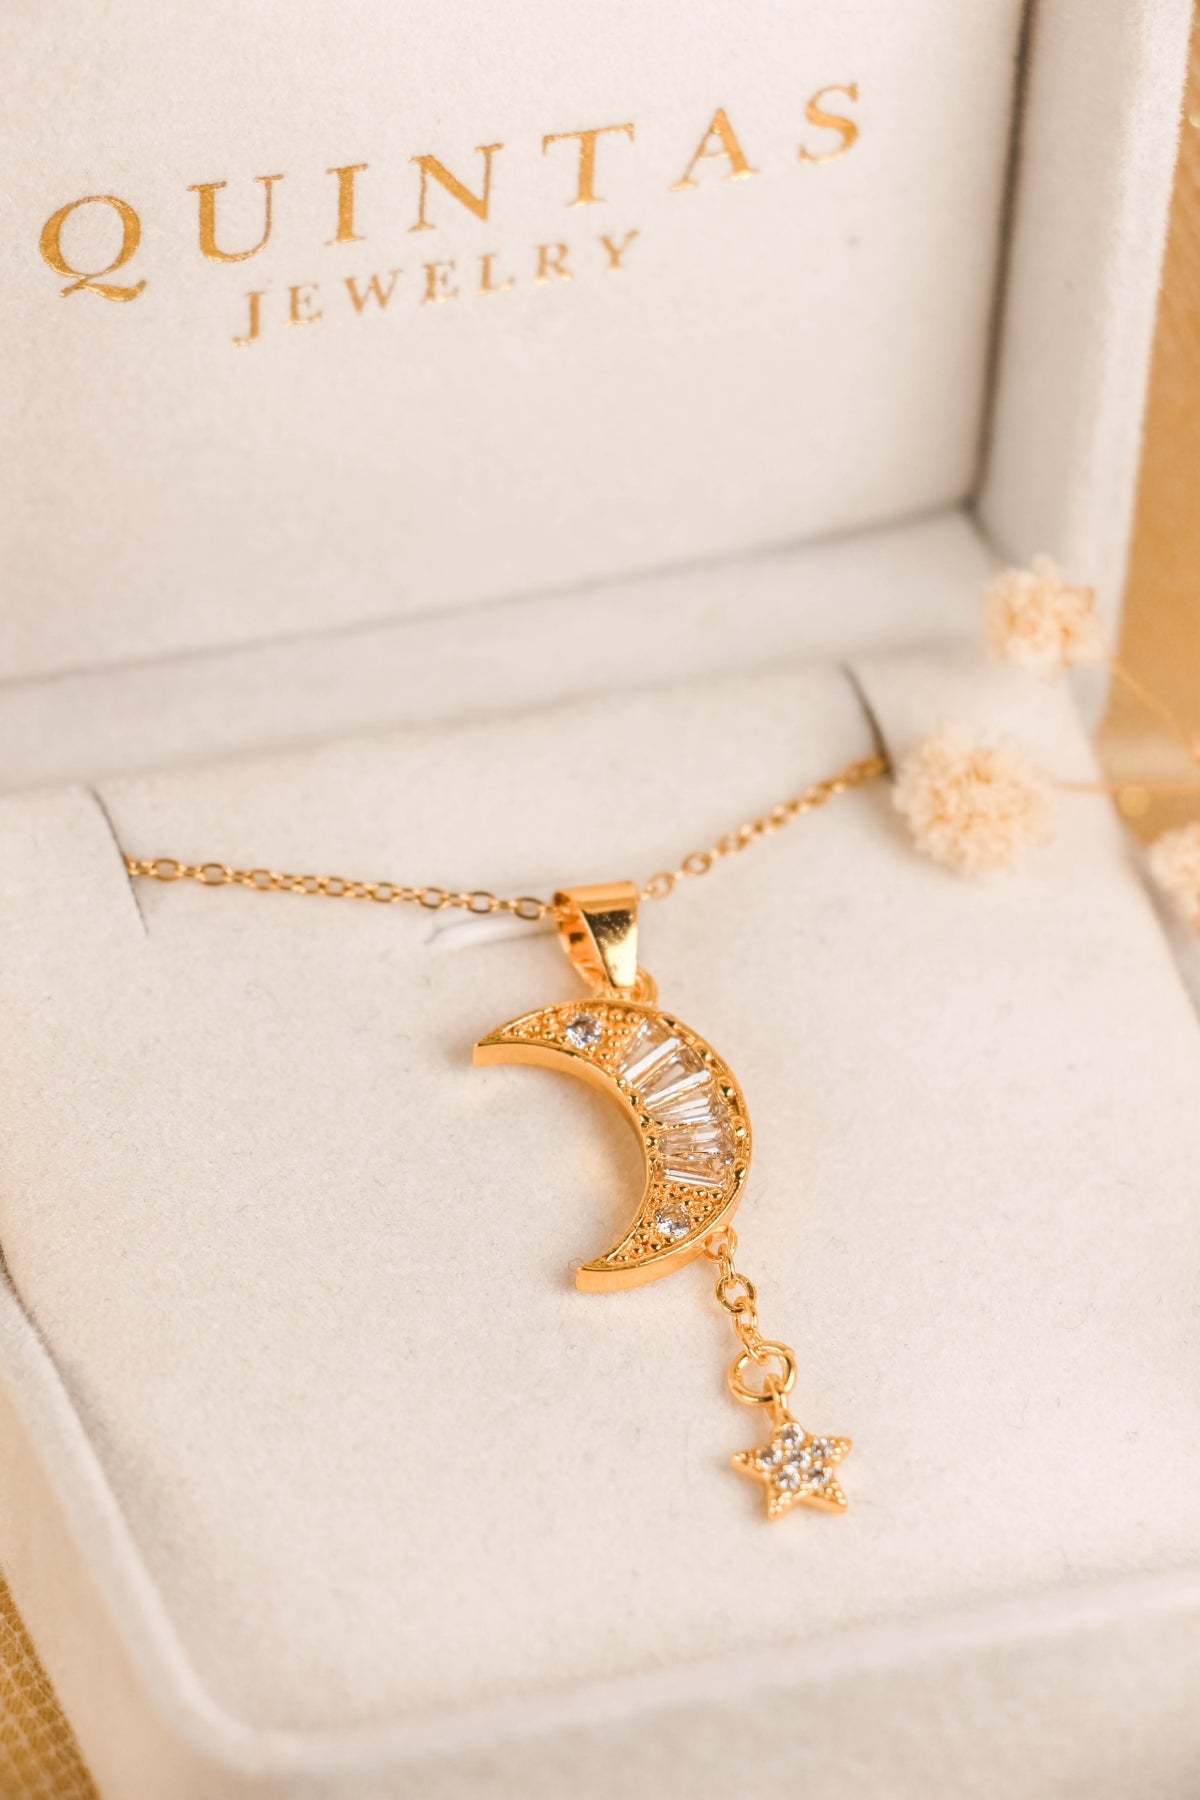 The Wishing Moon and Star Necklace